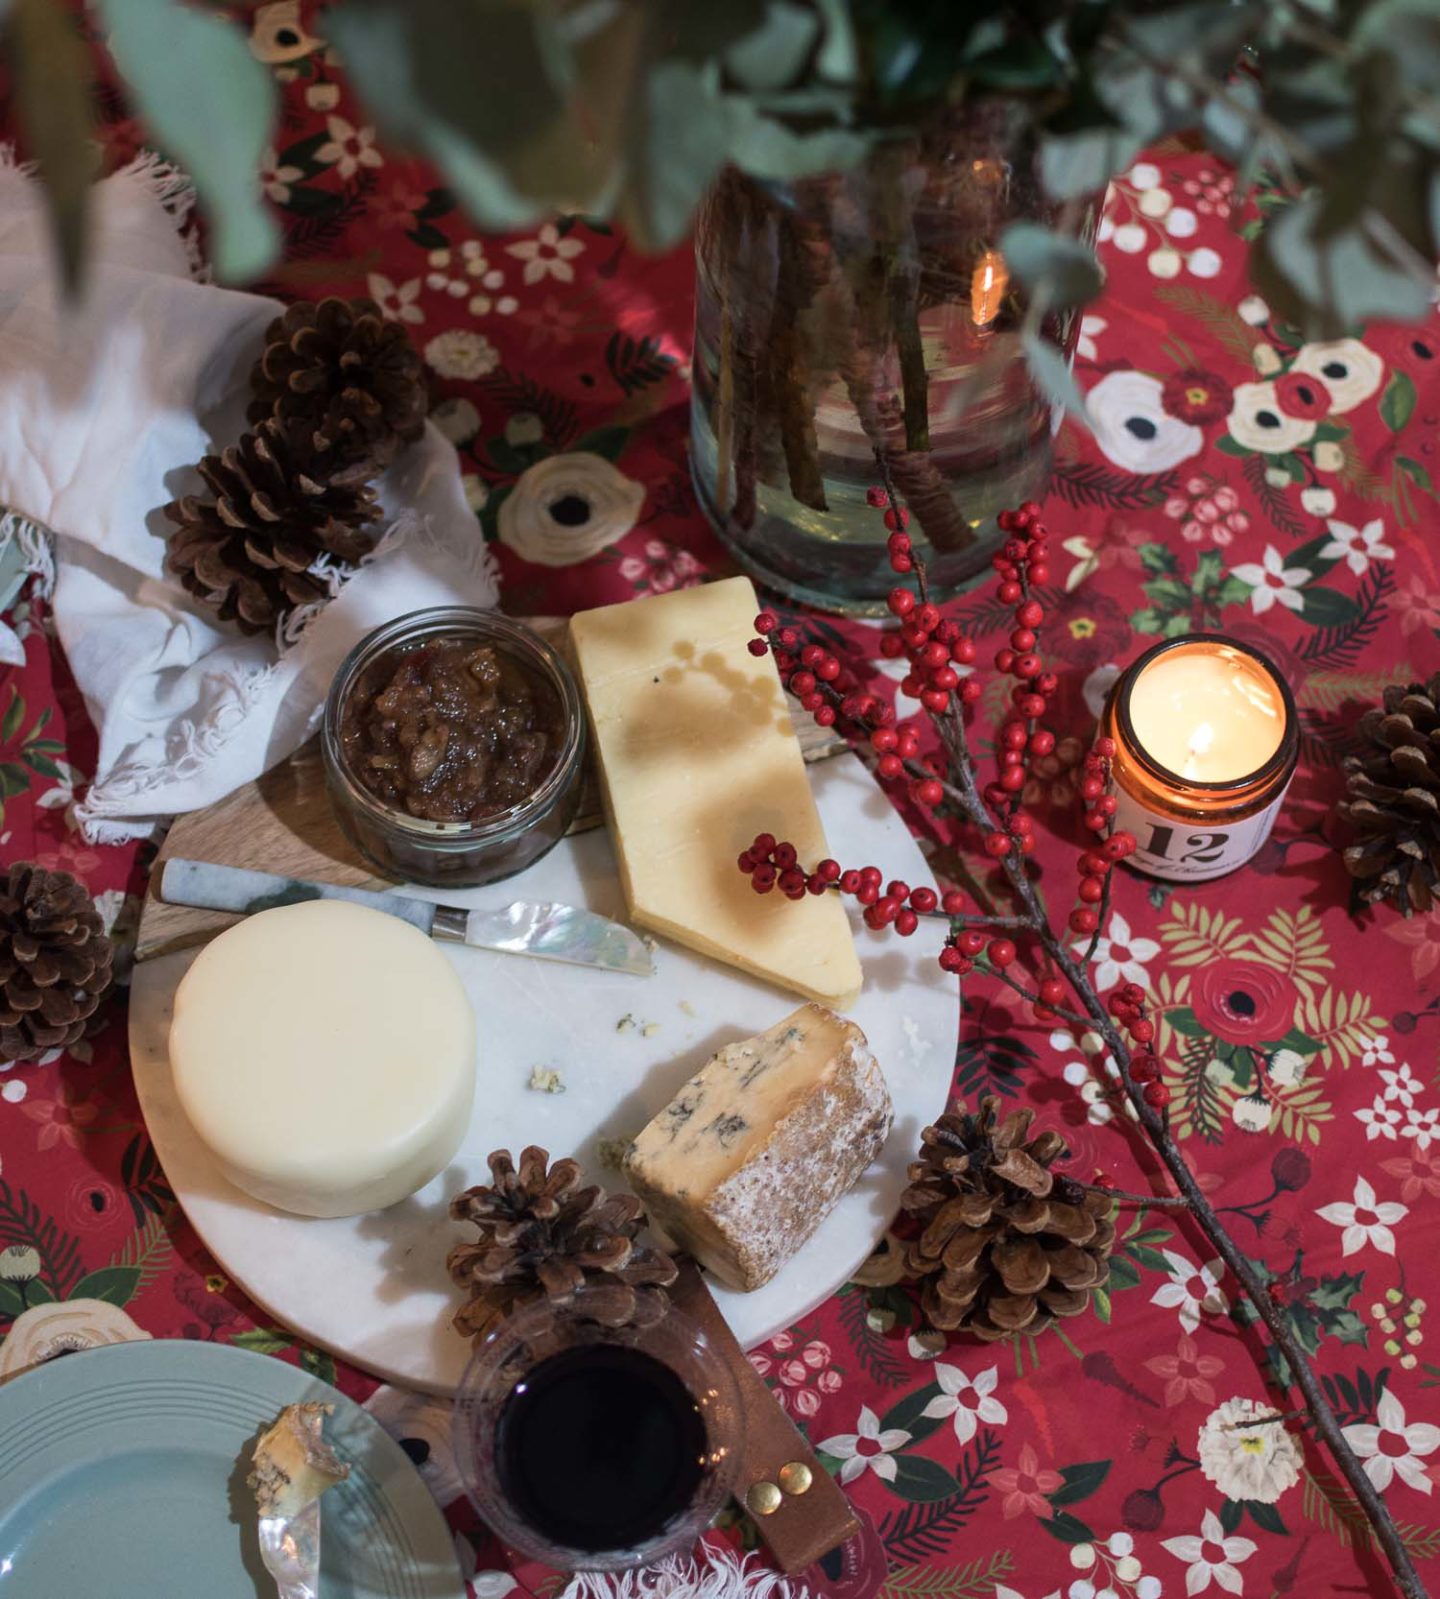 A Christmas cheese board, the art of hospitality